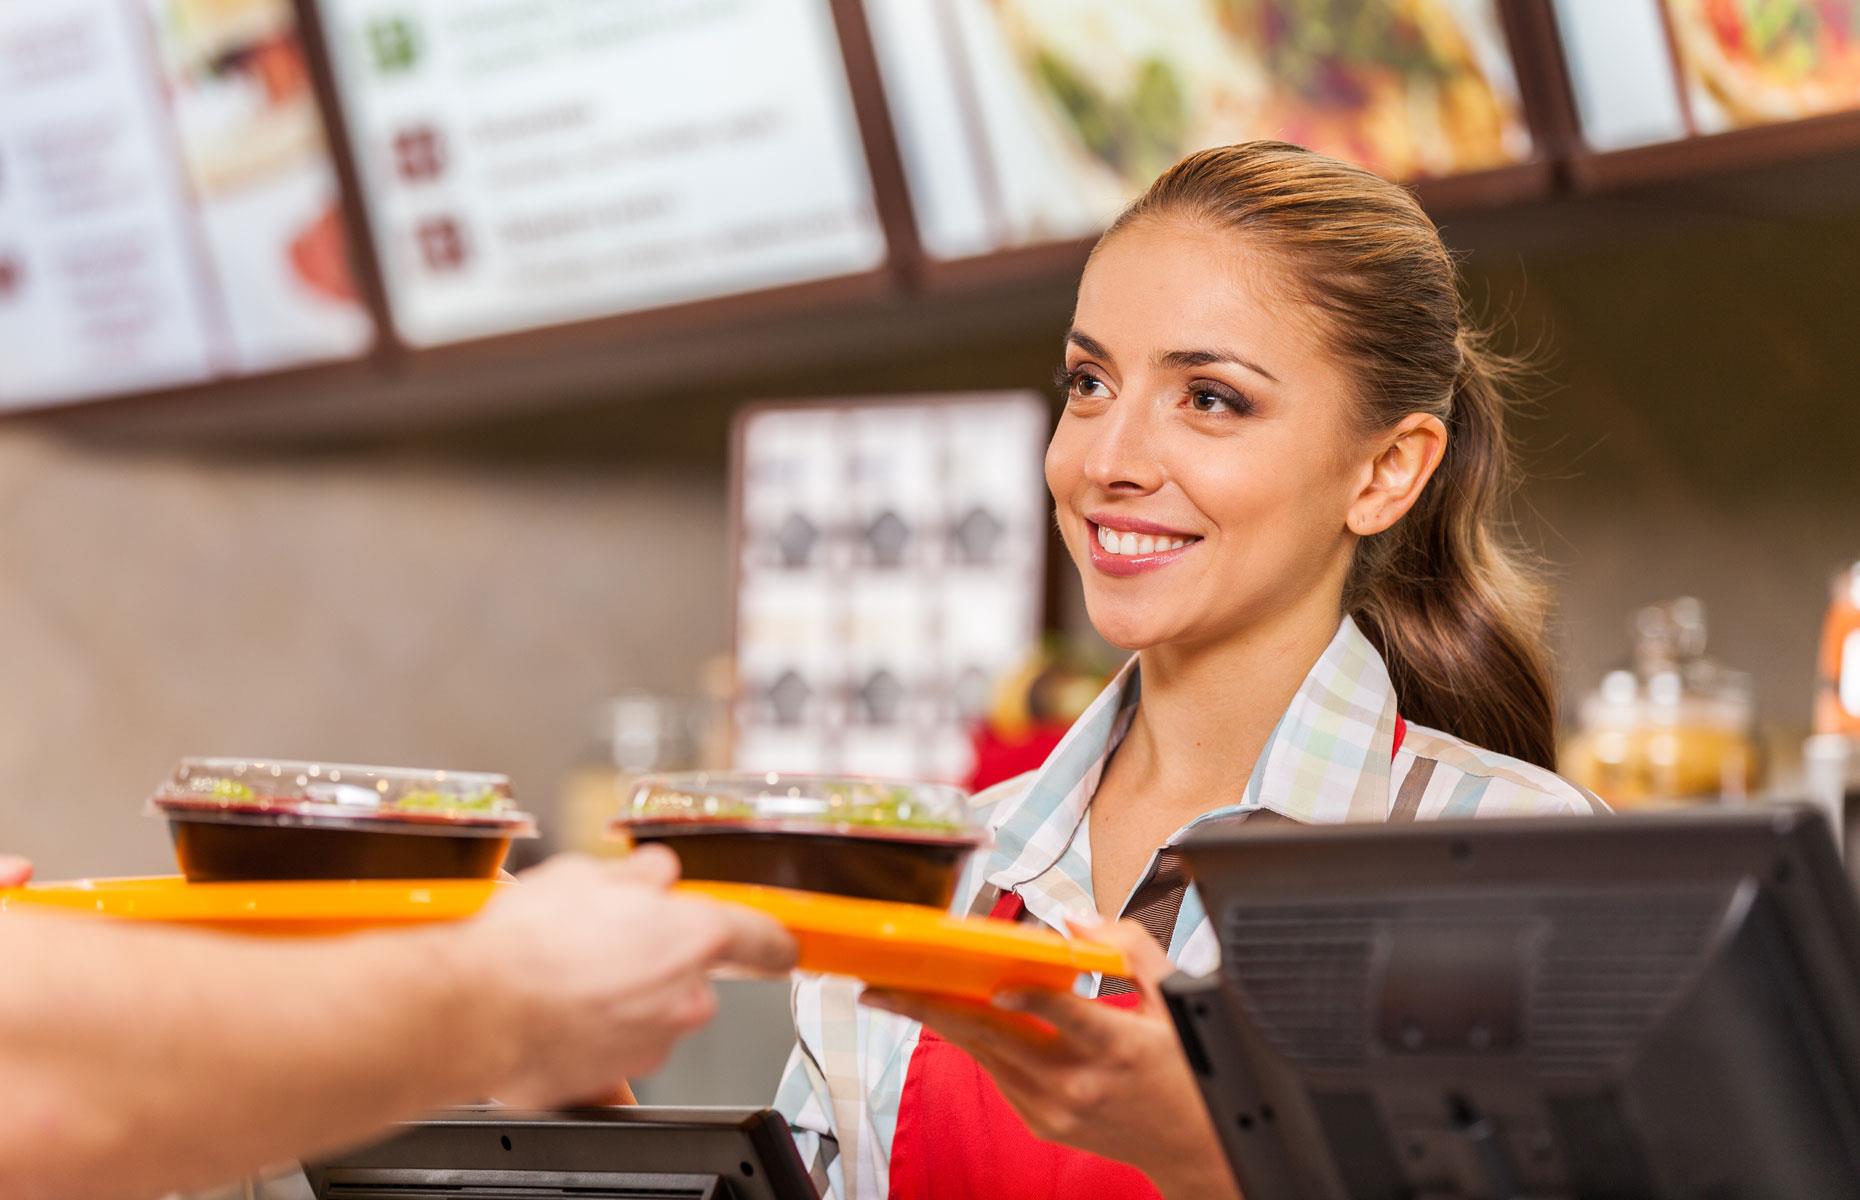 Highest-paying country for fast food workers: Denmark – $45,000 (£35k) average salary